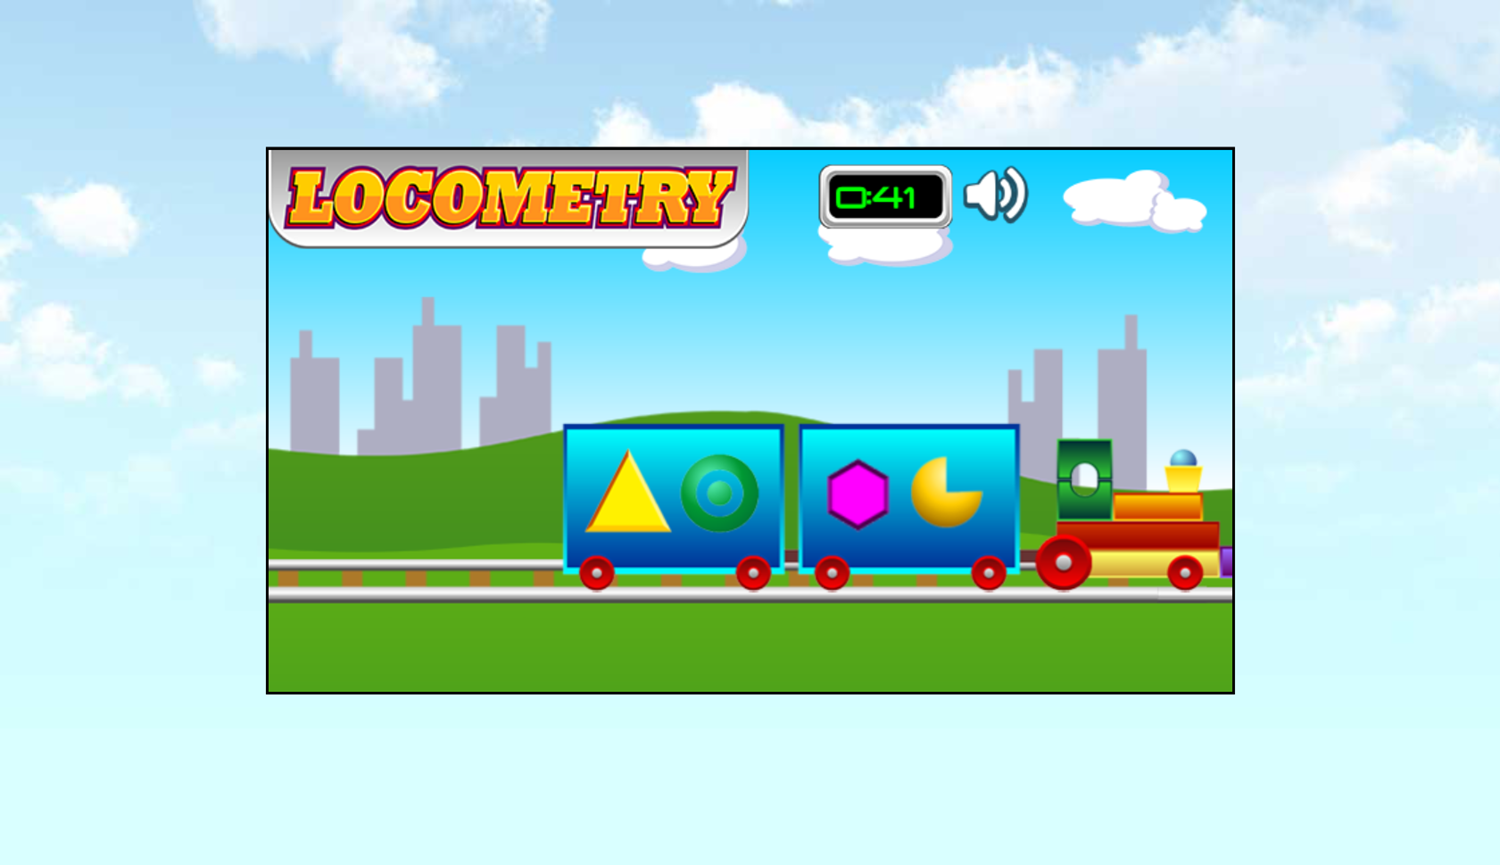 Locometry Game Level Complete Screenshot.